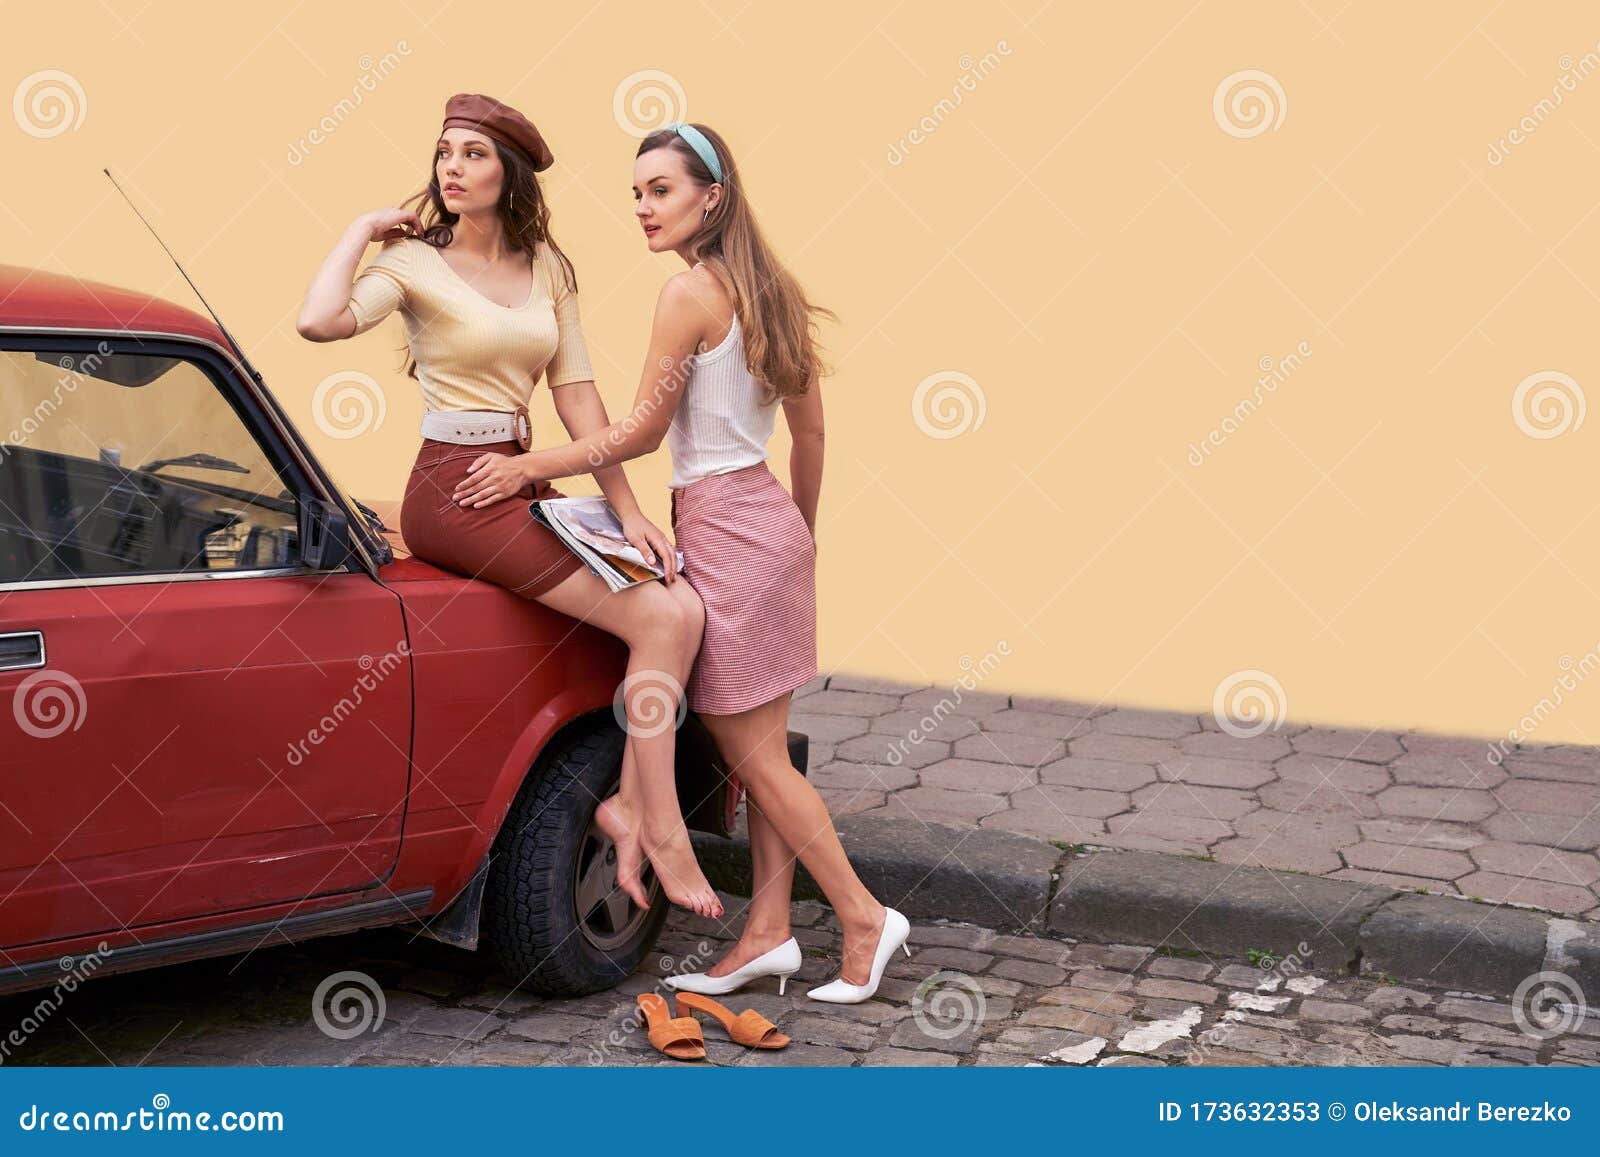 https://thumbs.dreamstime.com/z/young-beautiful-girls-dressed-retro-vintage-style-enjoying-old-european-city-summertime-lifestyle-young-beautiful-girls-173632353.jpg